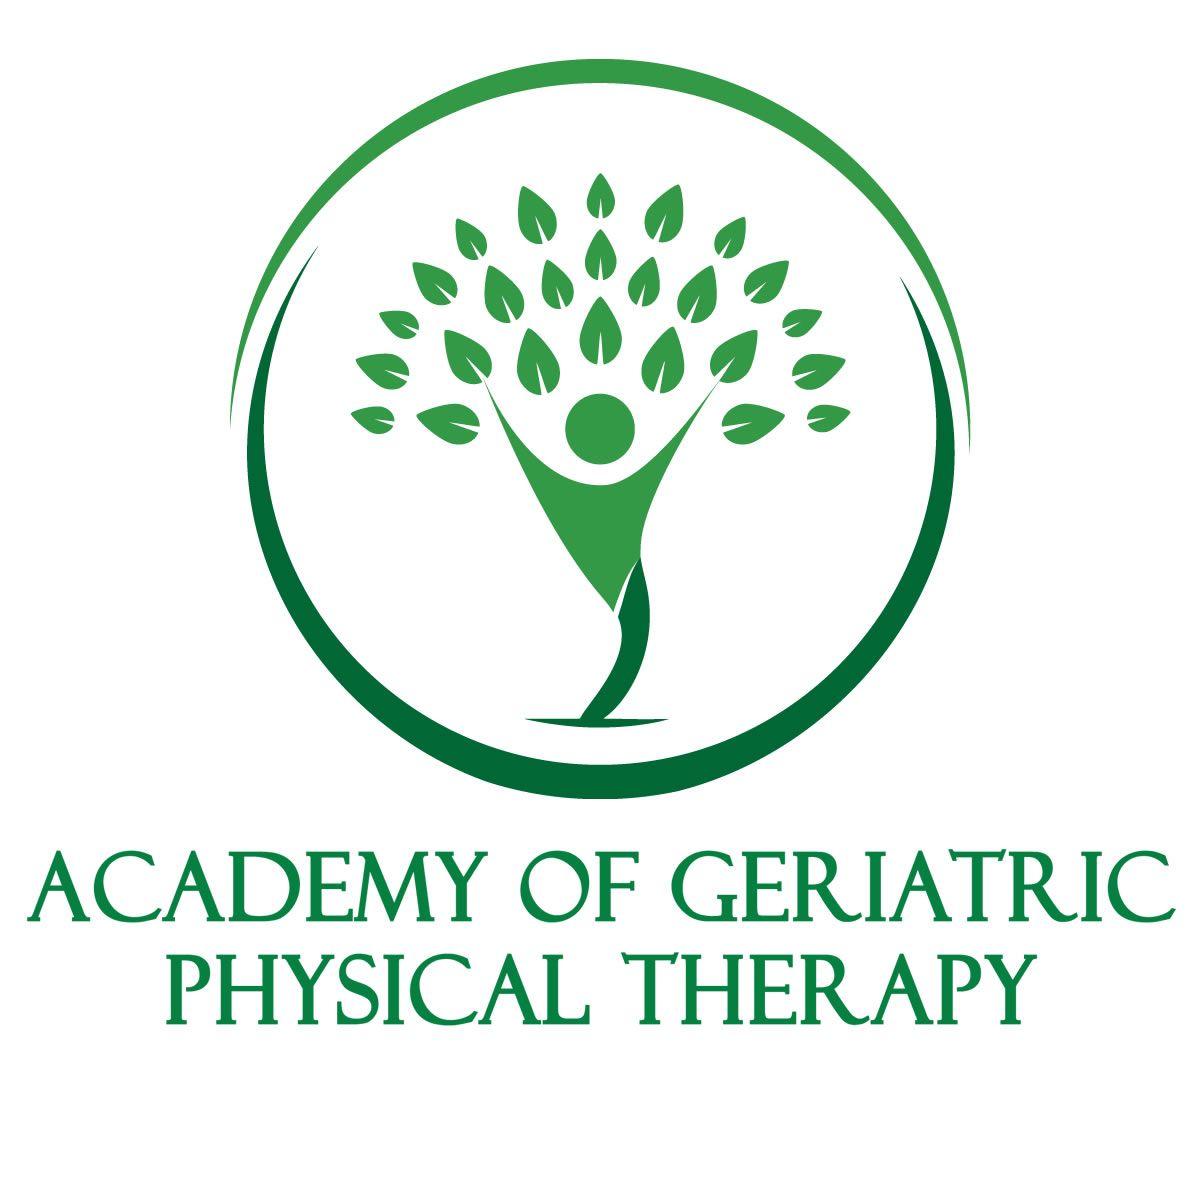 Physical Therapy Logo - Home Page -Academy of Geriatric Physical Therapy - GeriatricsPT.org